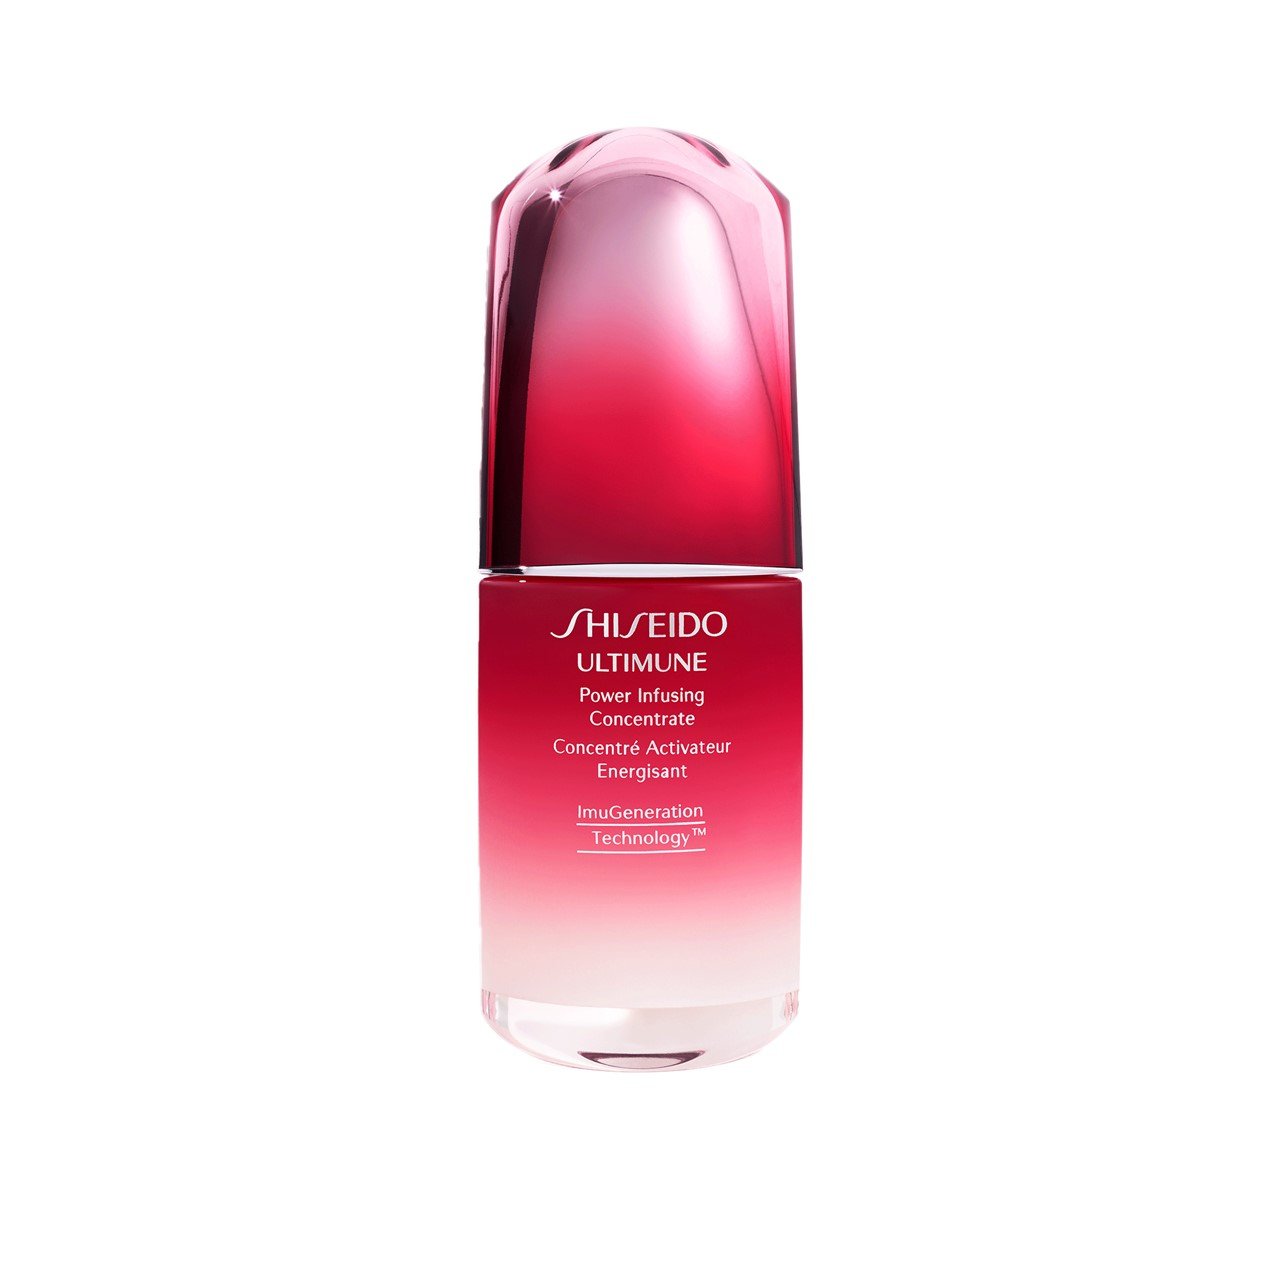 Shiseido power infusing concentrate. Ultimune концентрат шисейдо. Ultimune концентрат шисейдо Power infusing. Shiseido Ultimune Power infusing Concentrate 50 ml. Shiseido Ultimate Power infusing Concentrate.